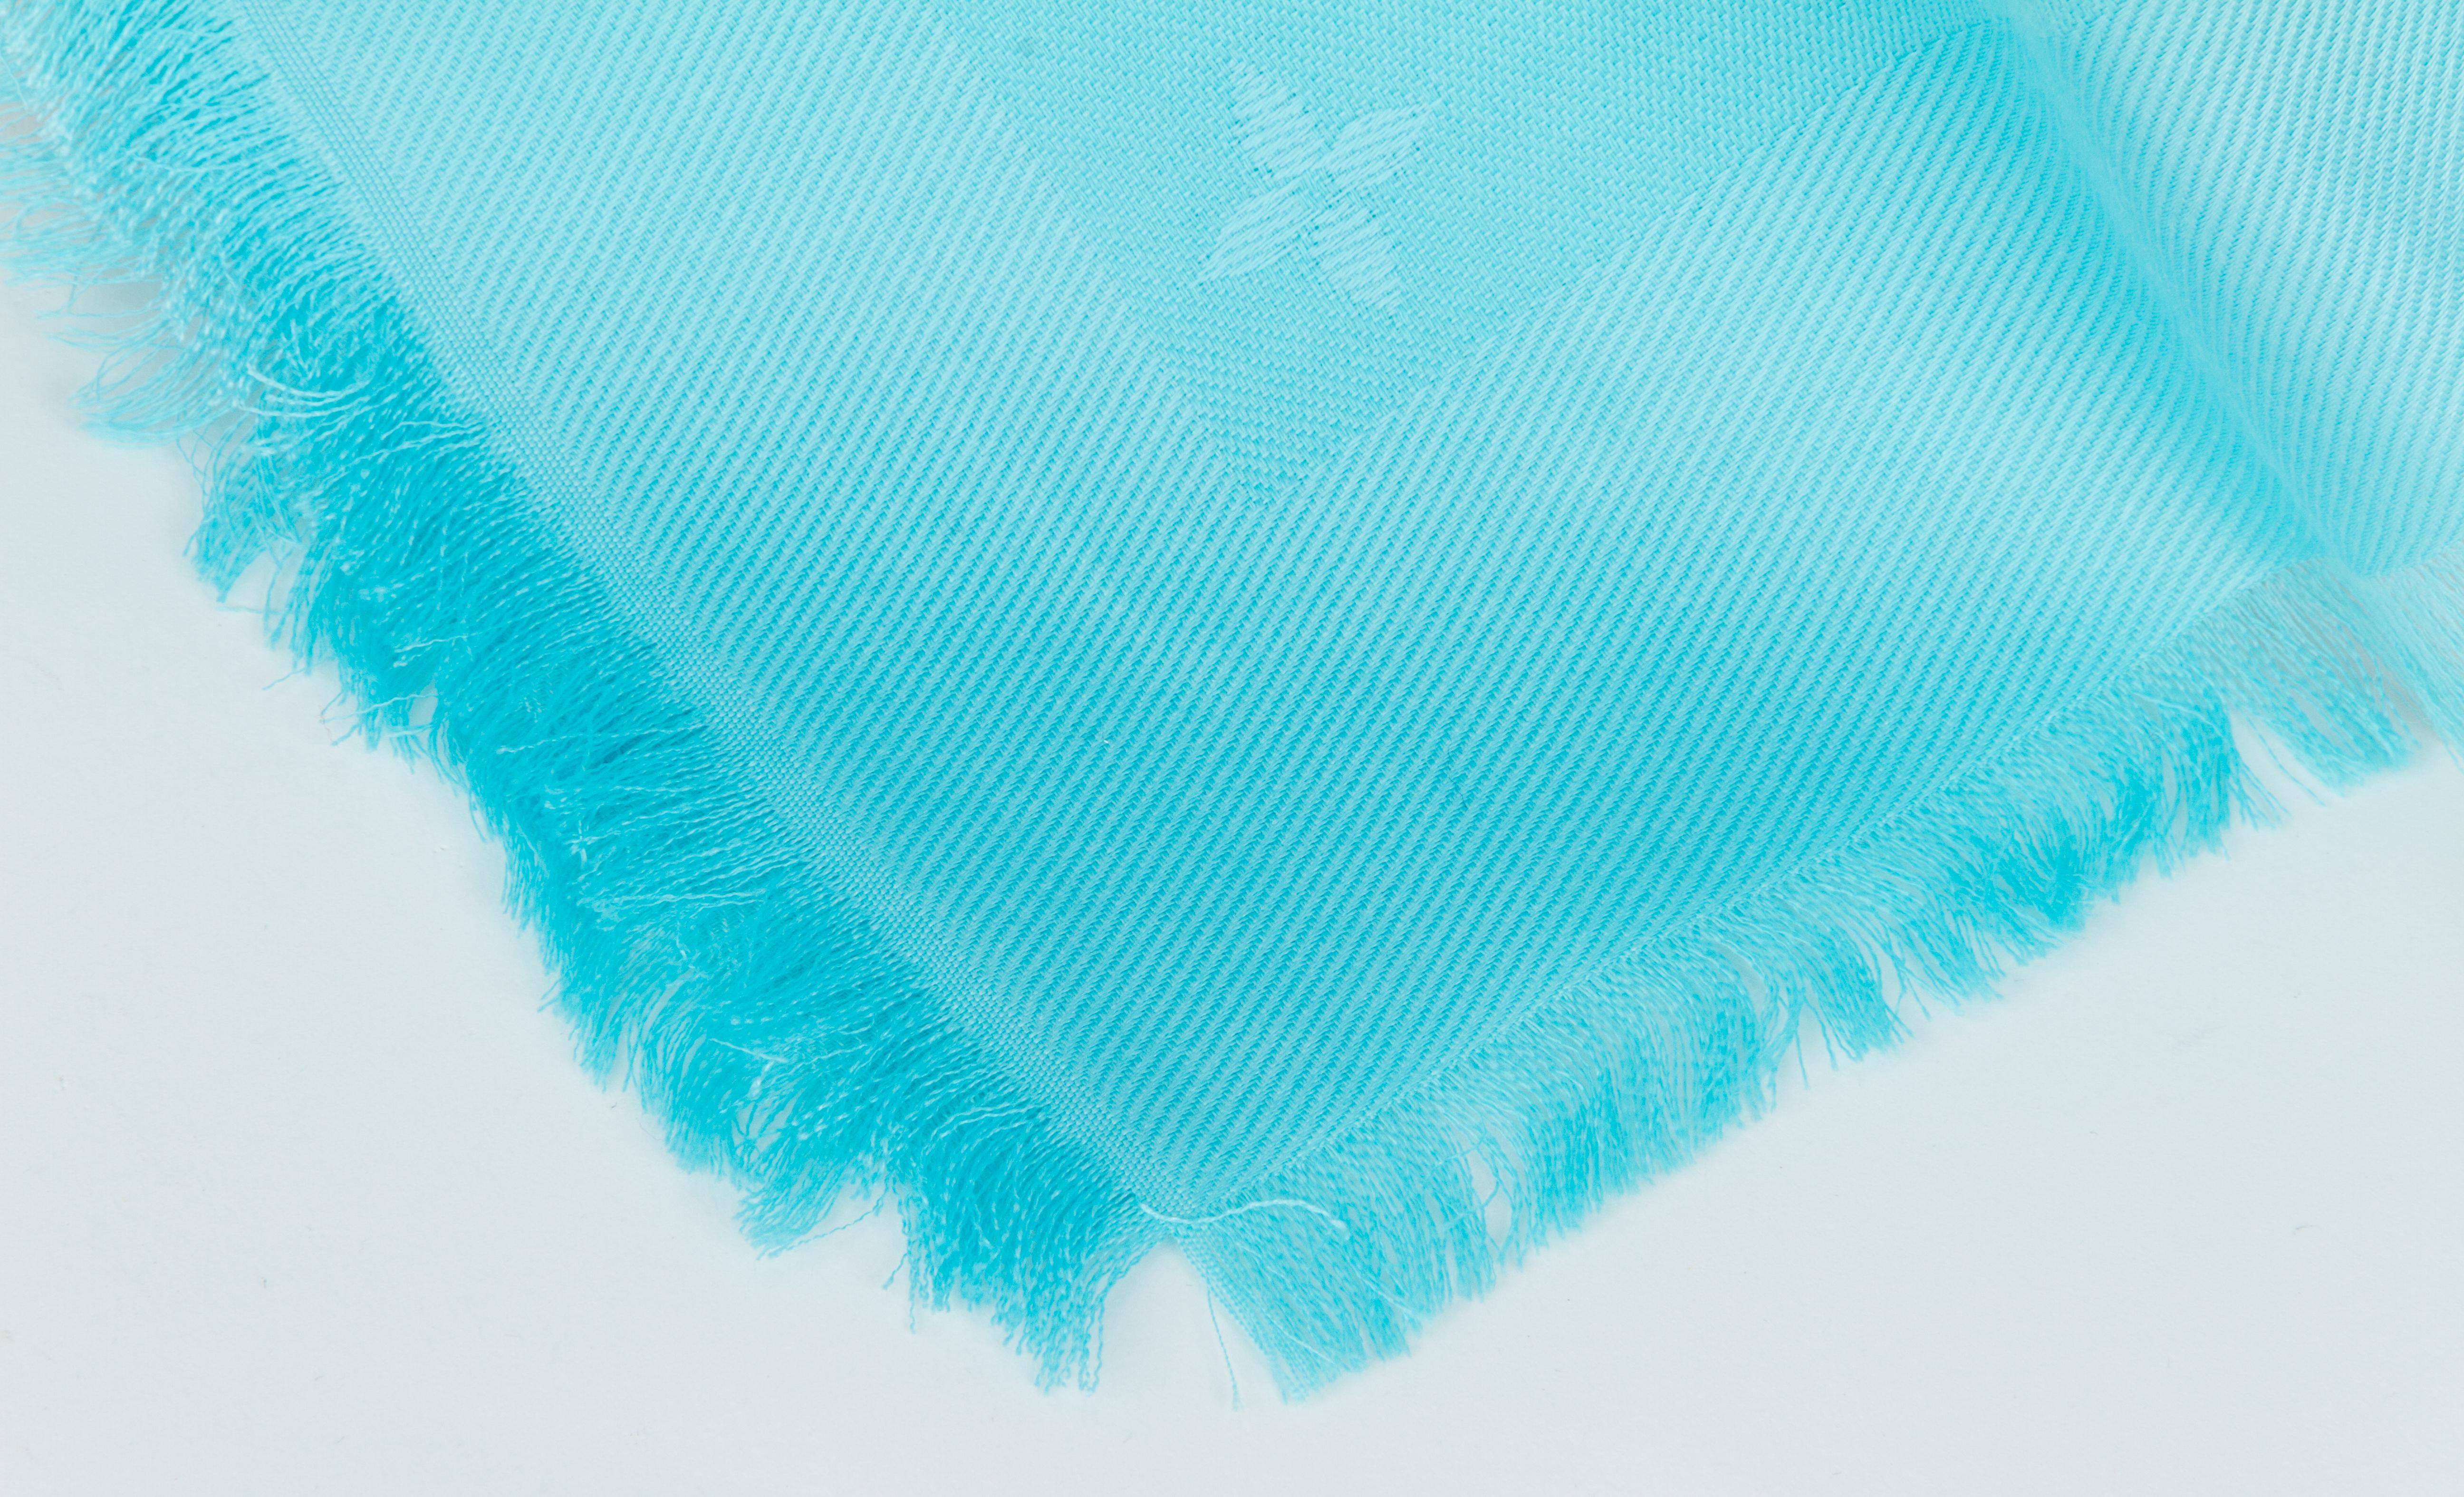 Louis Vuitton limited edition oversized turquoise silk and wool shawl with basketballs and logos design. Jacquard weave. Fringe finish.